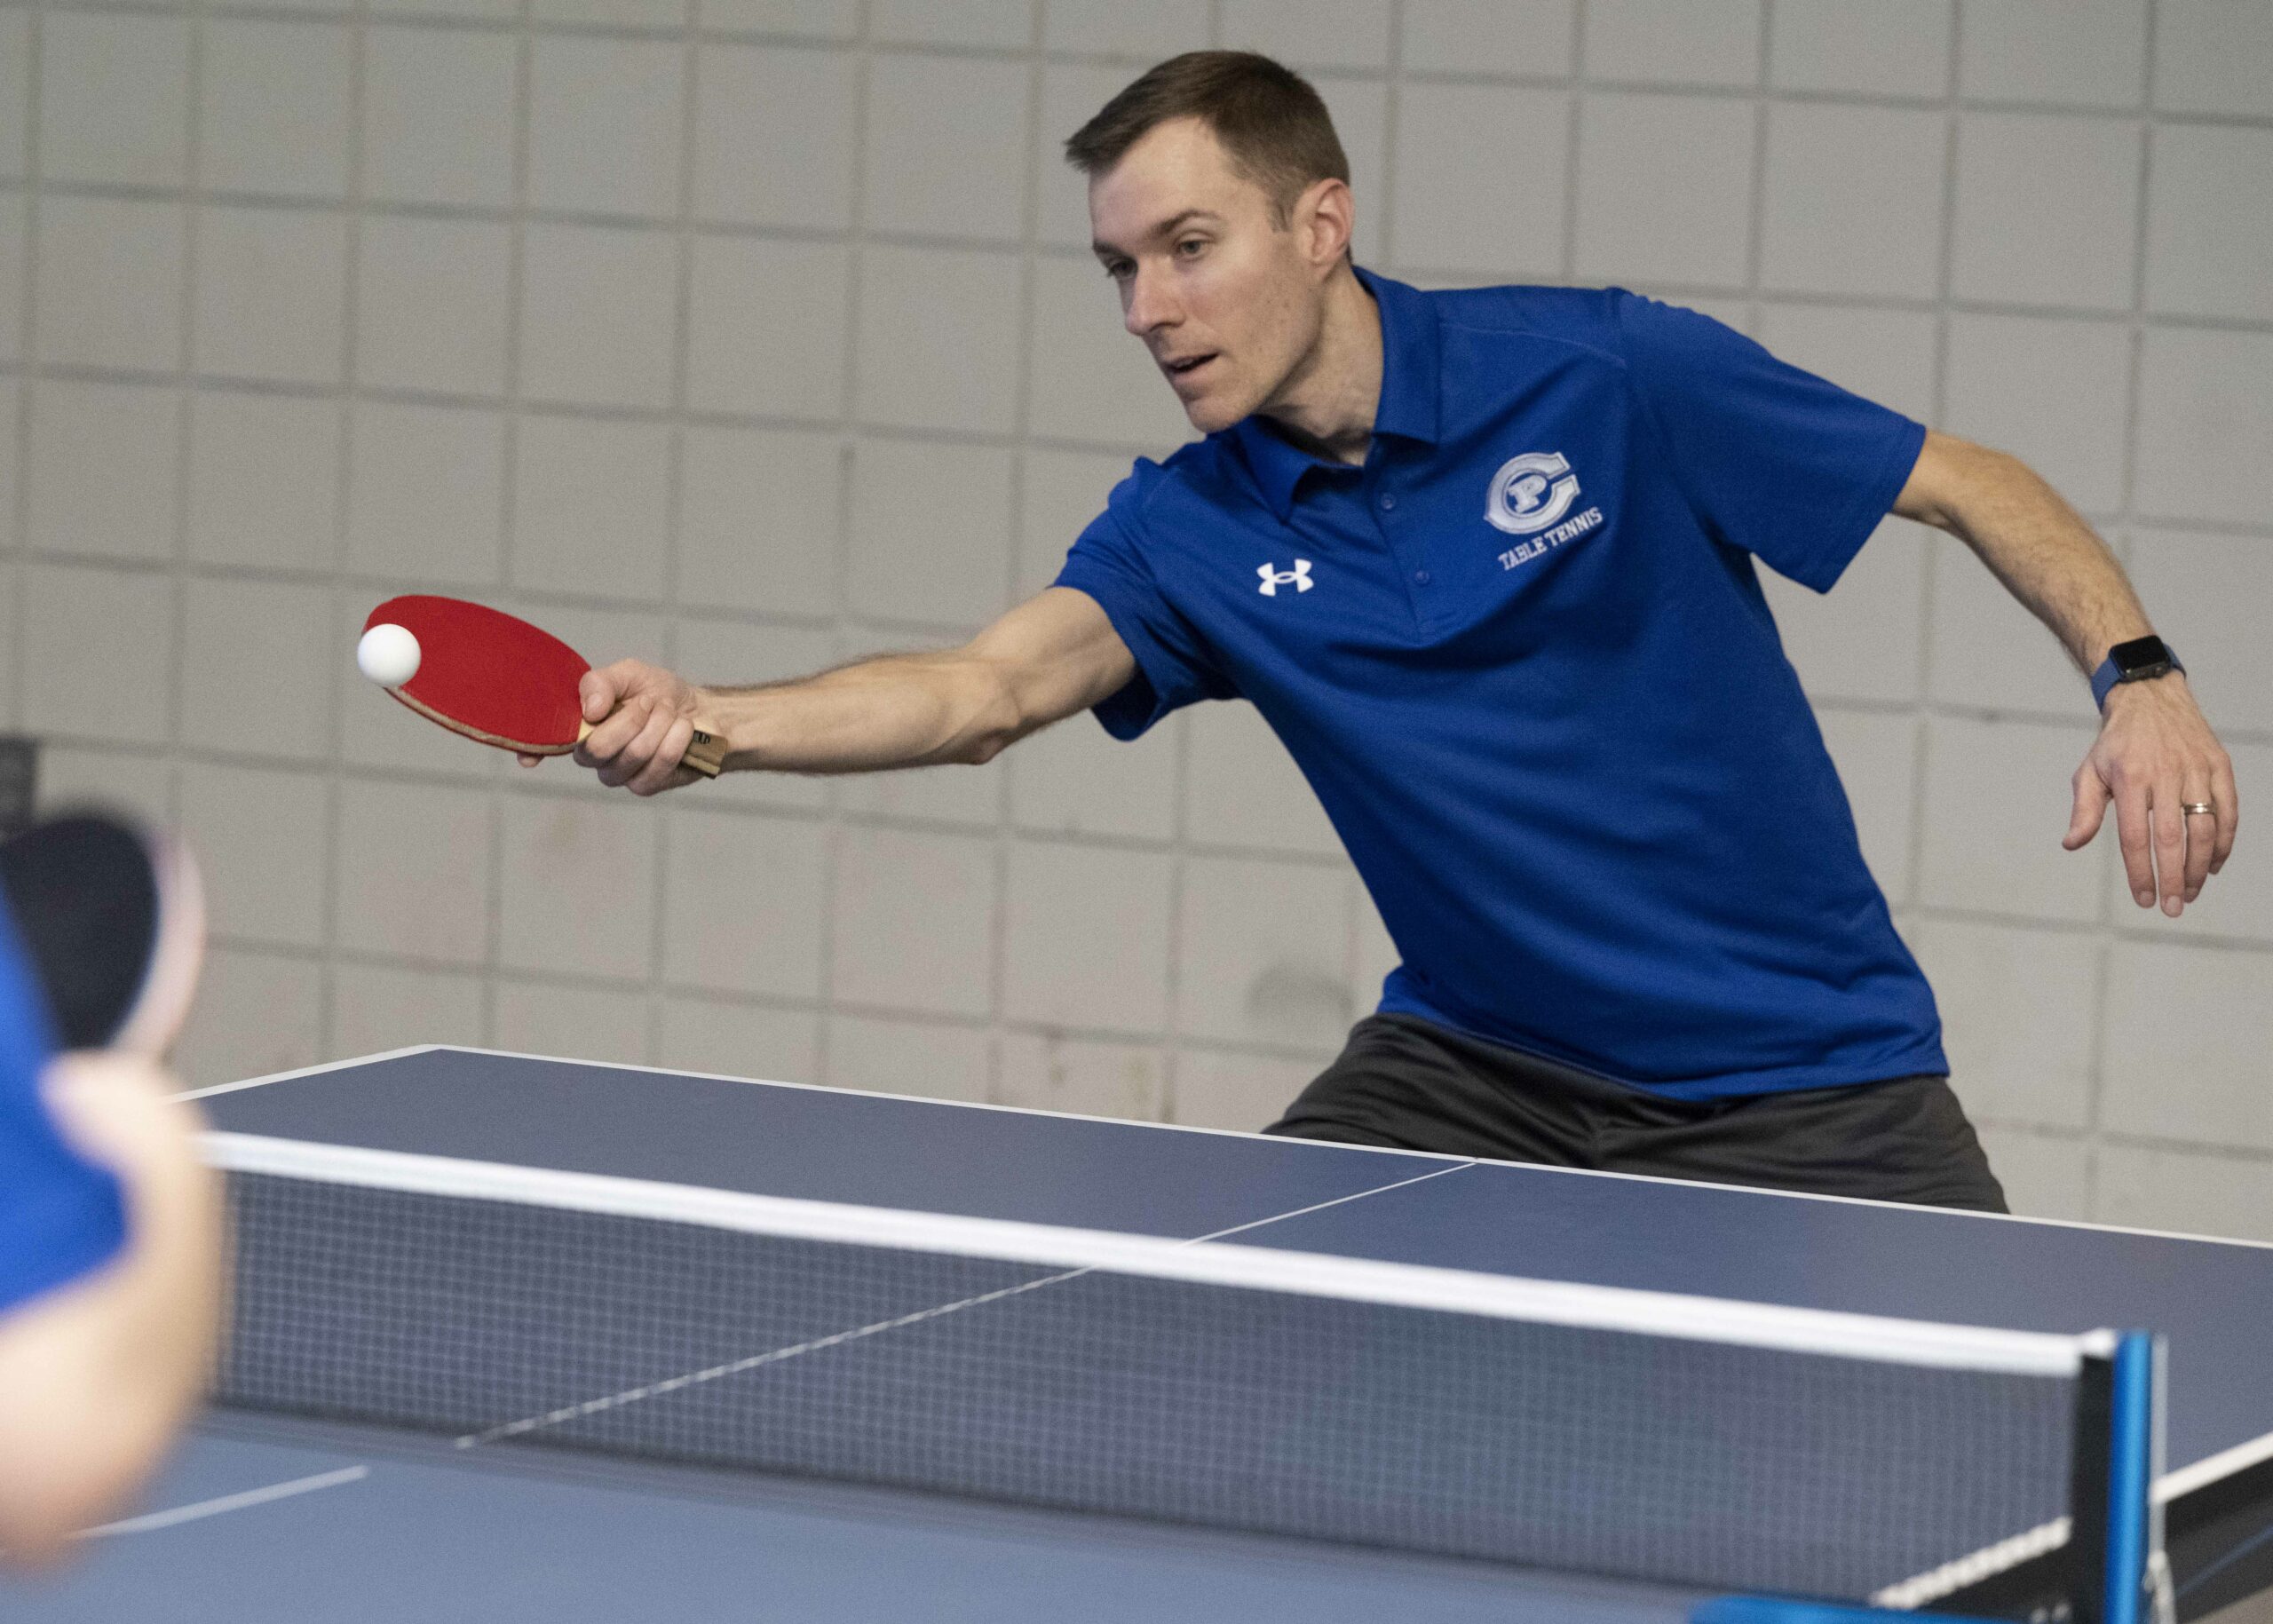 Creighton Prep Table Tennis Coach Inspired To Compete In CSG